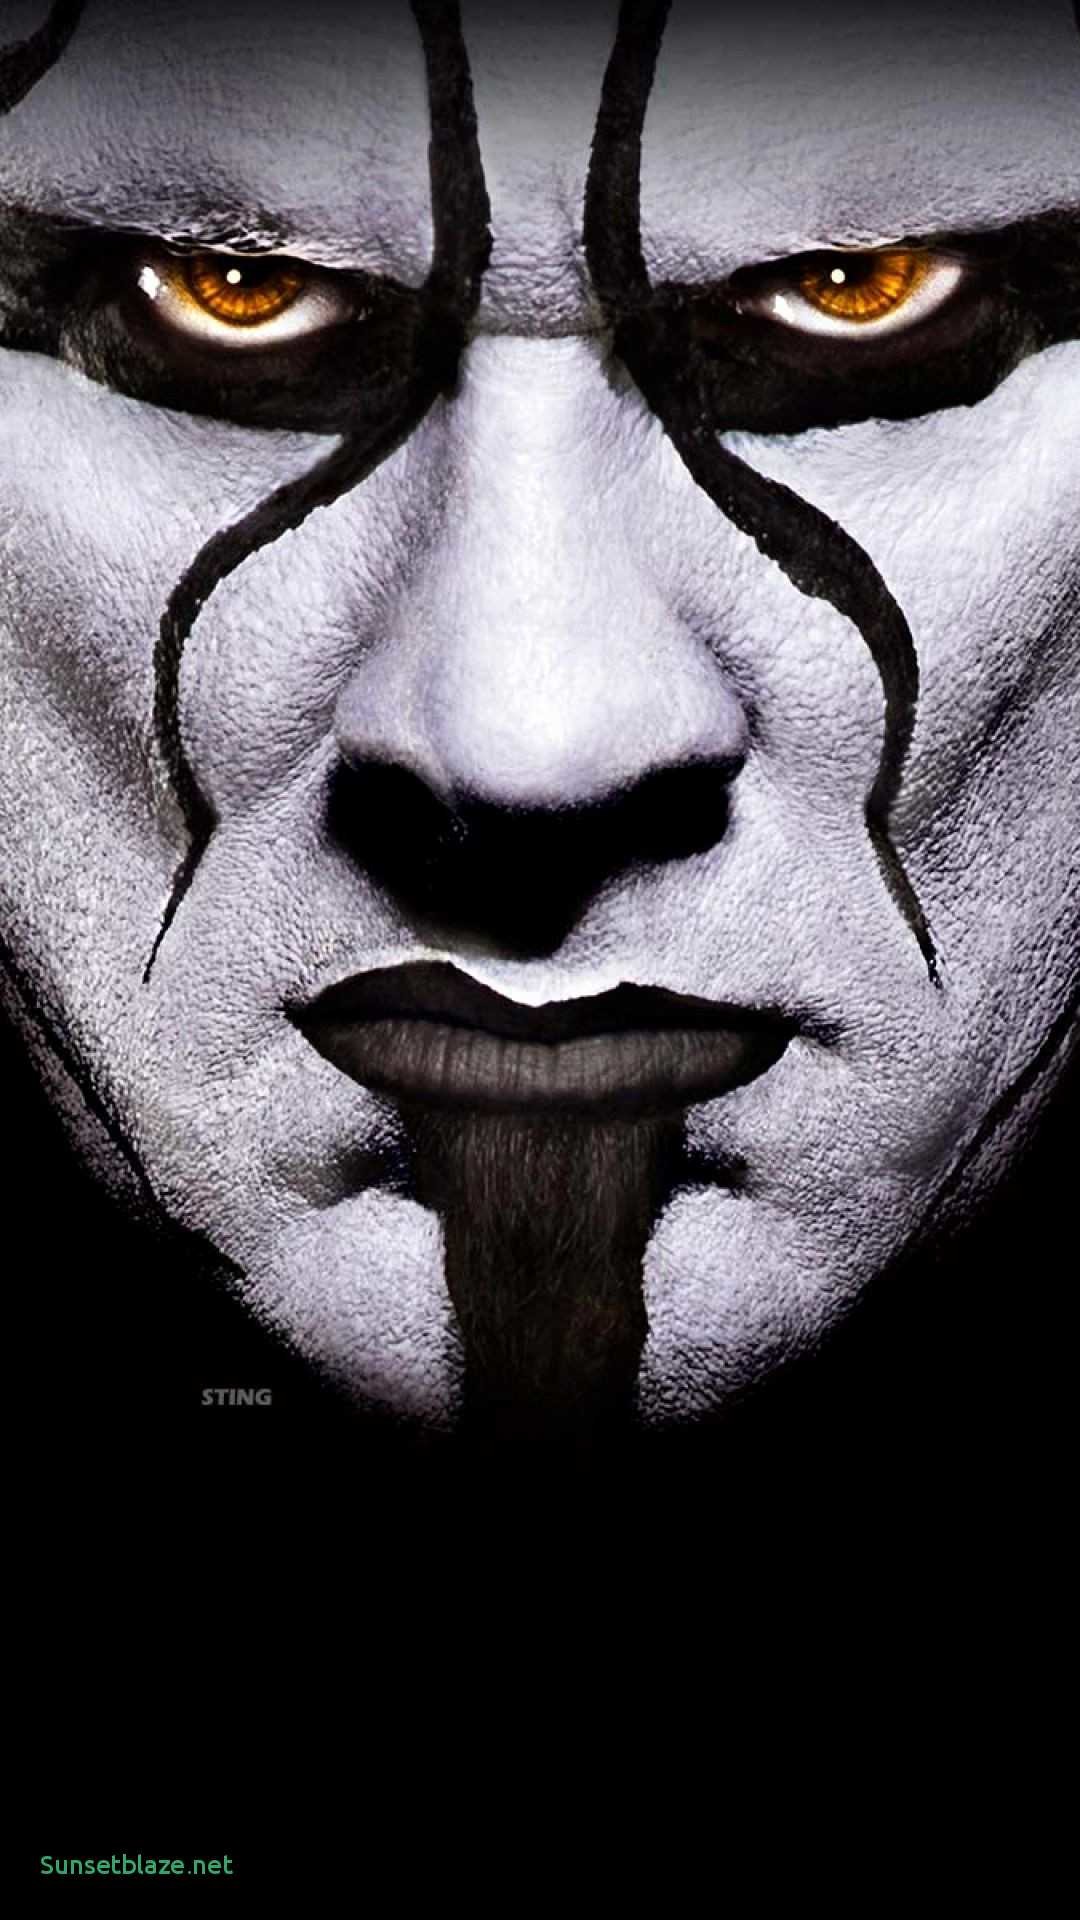 Amazing Wallpapers Awesome Iphone Wallpapers Hd Car - Wwe Sting Wallpaper Iphone - HD Wallpaper 